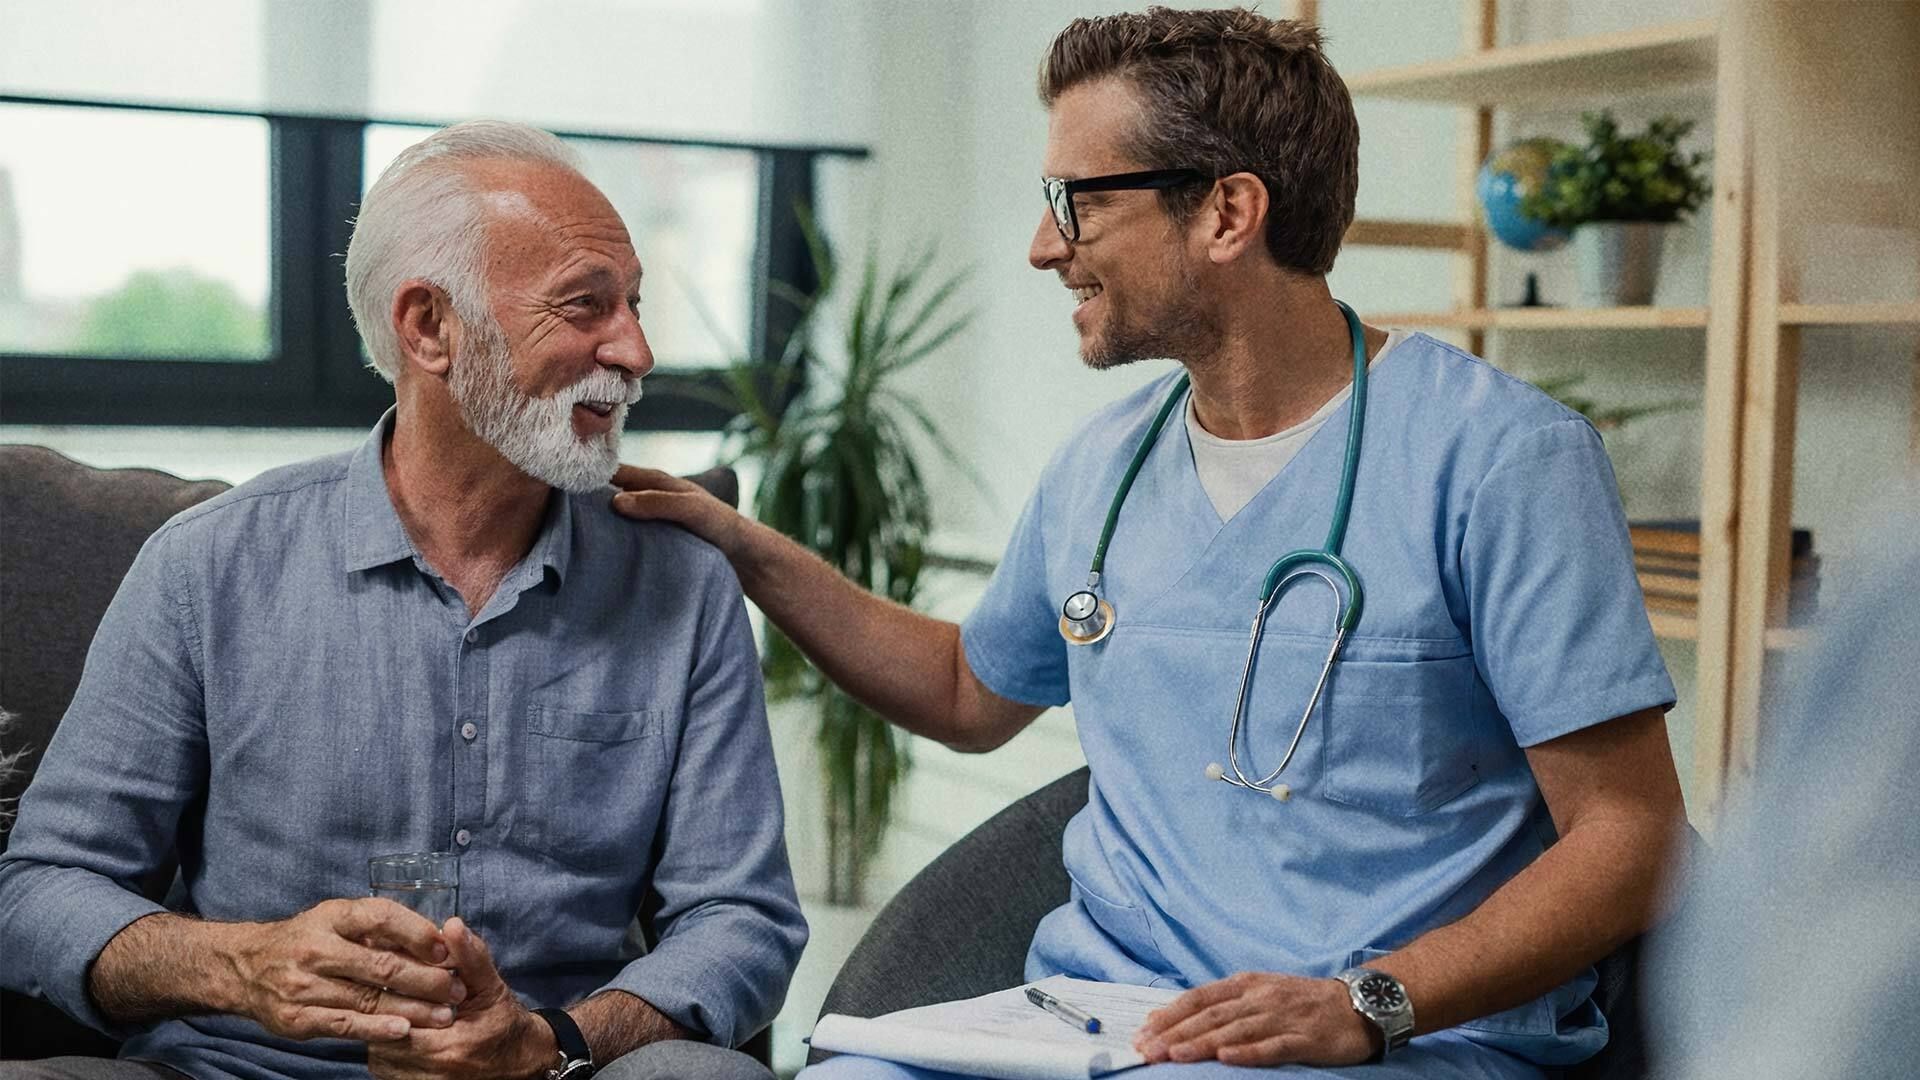 A male doctor talking with a male patient